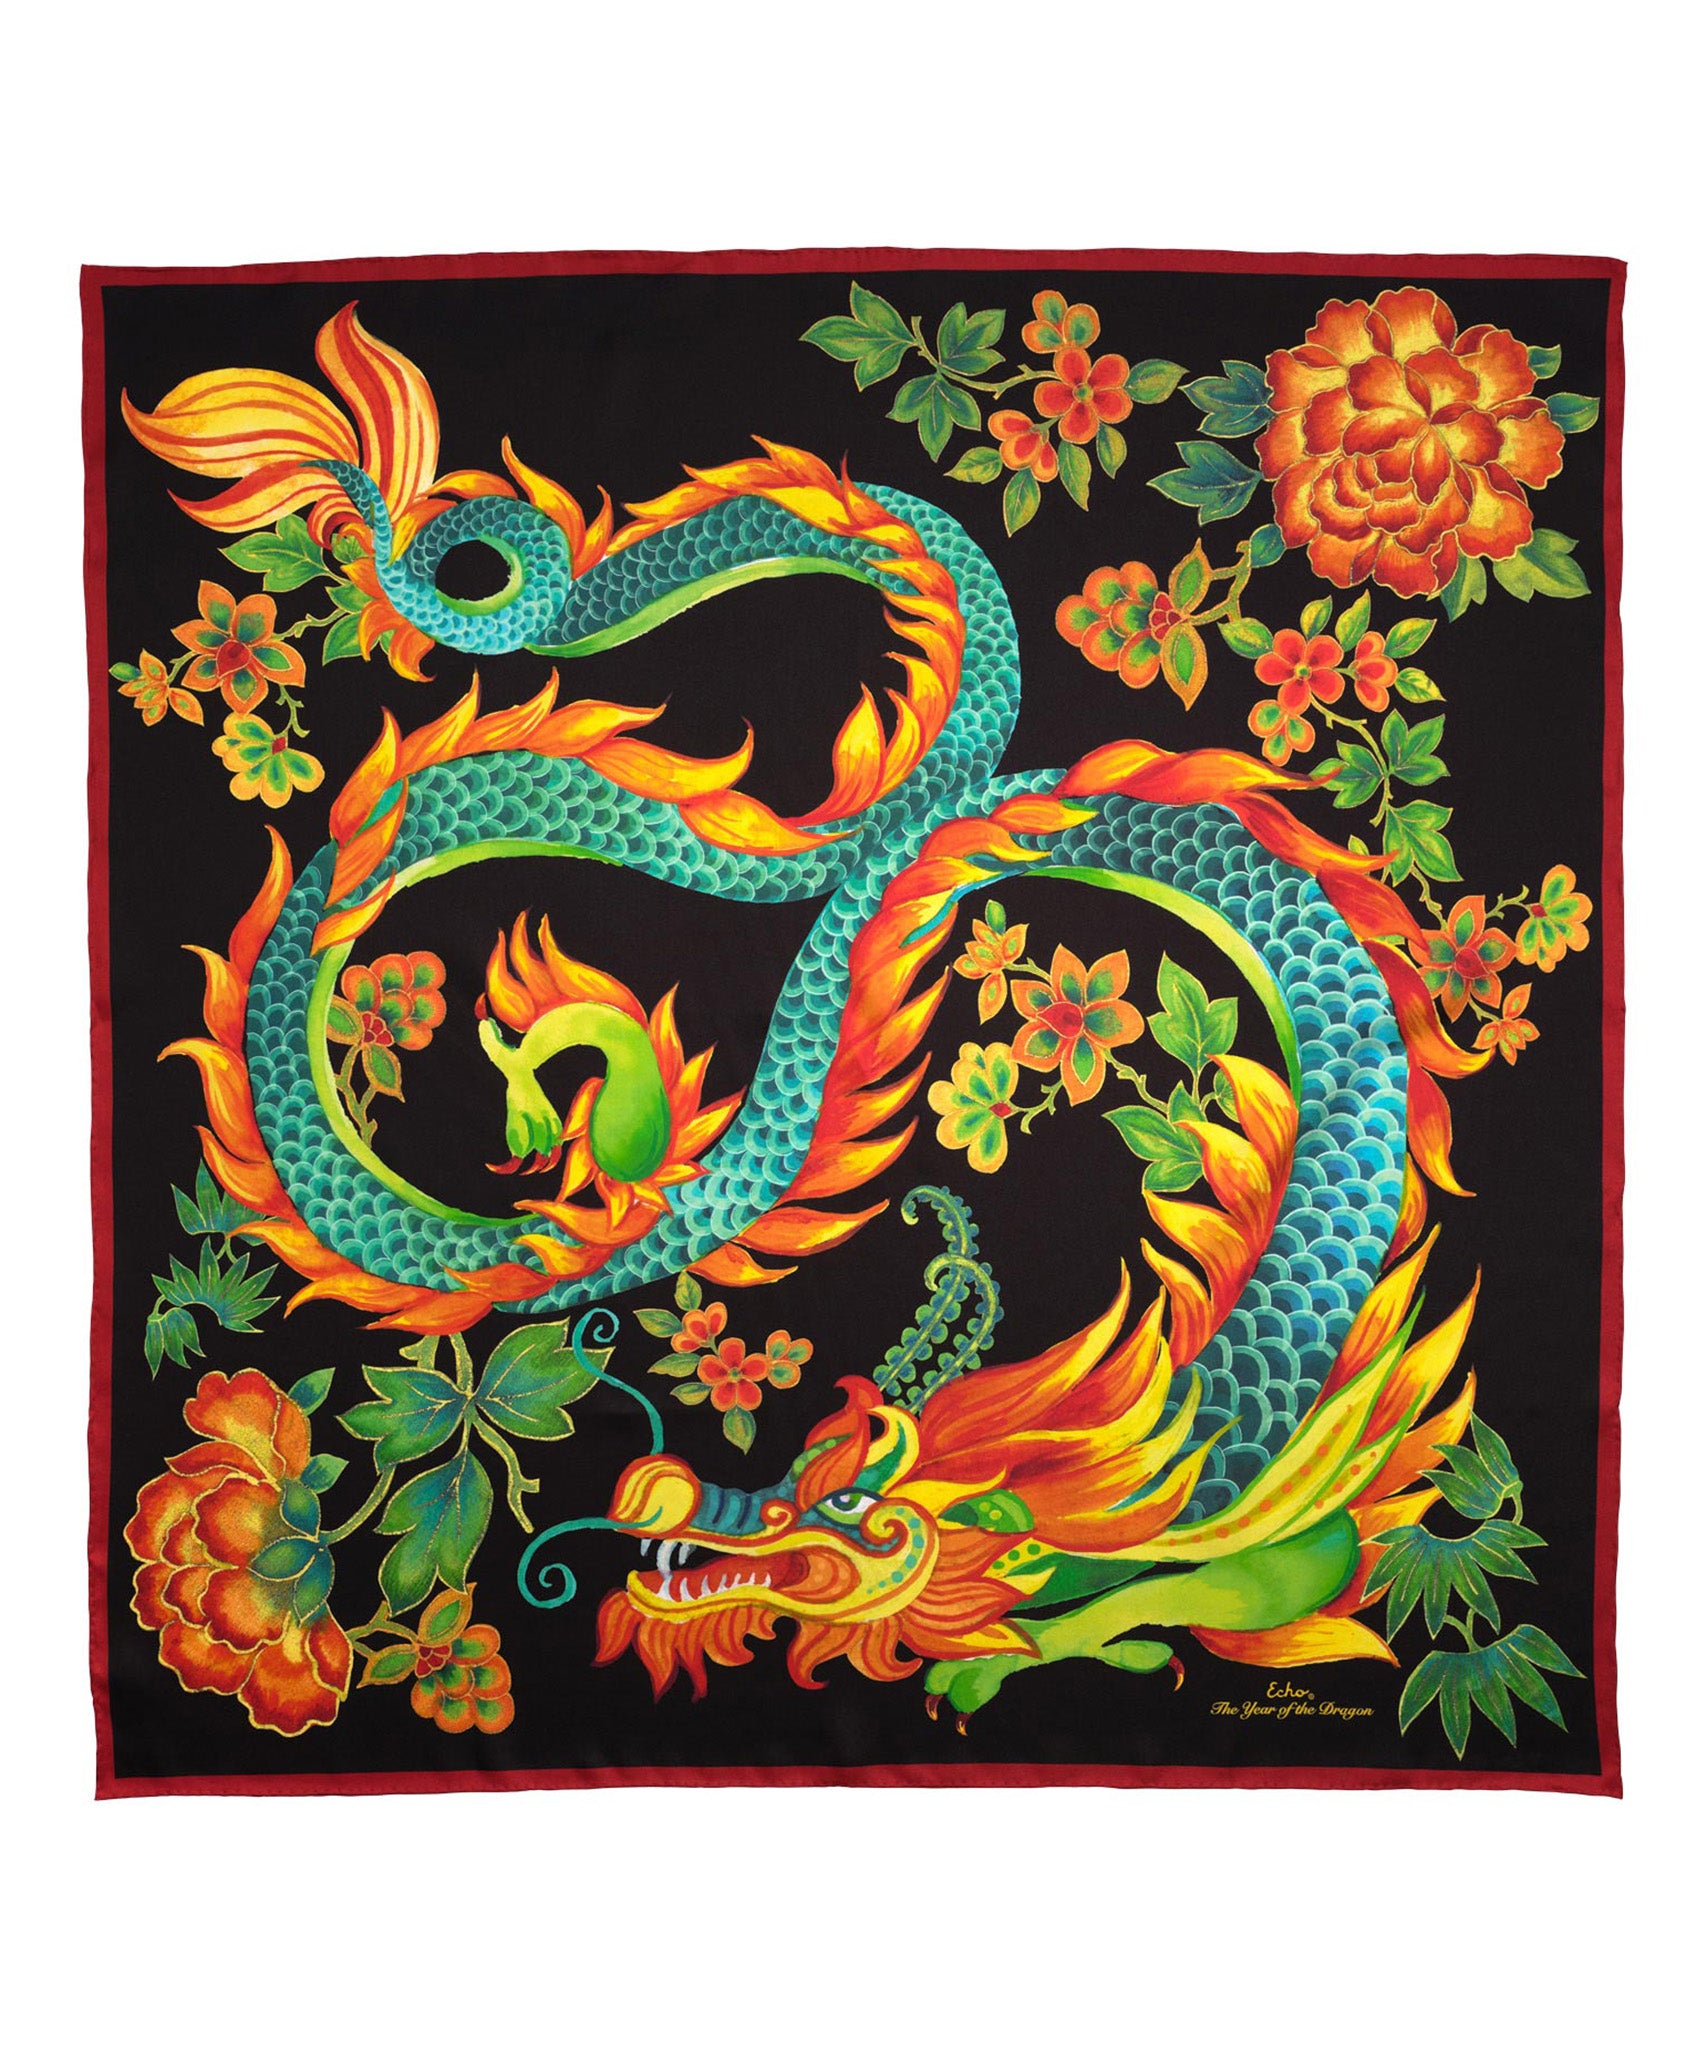 Year of the Dragon Scarf in colorway black